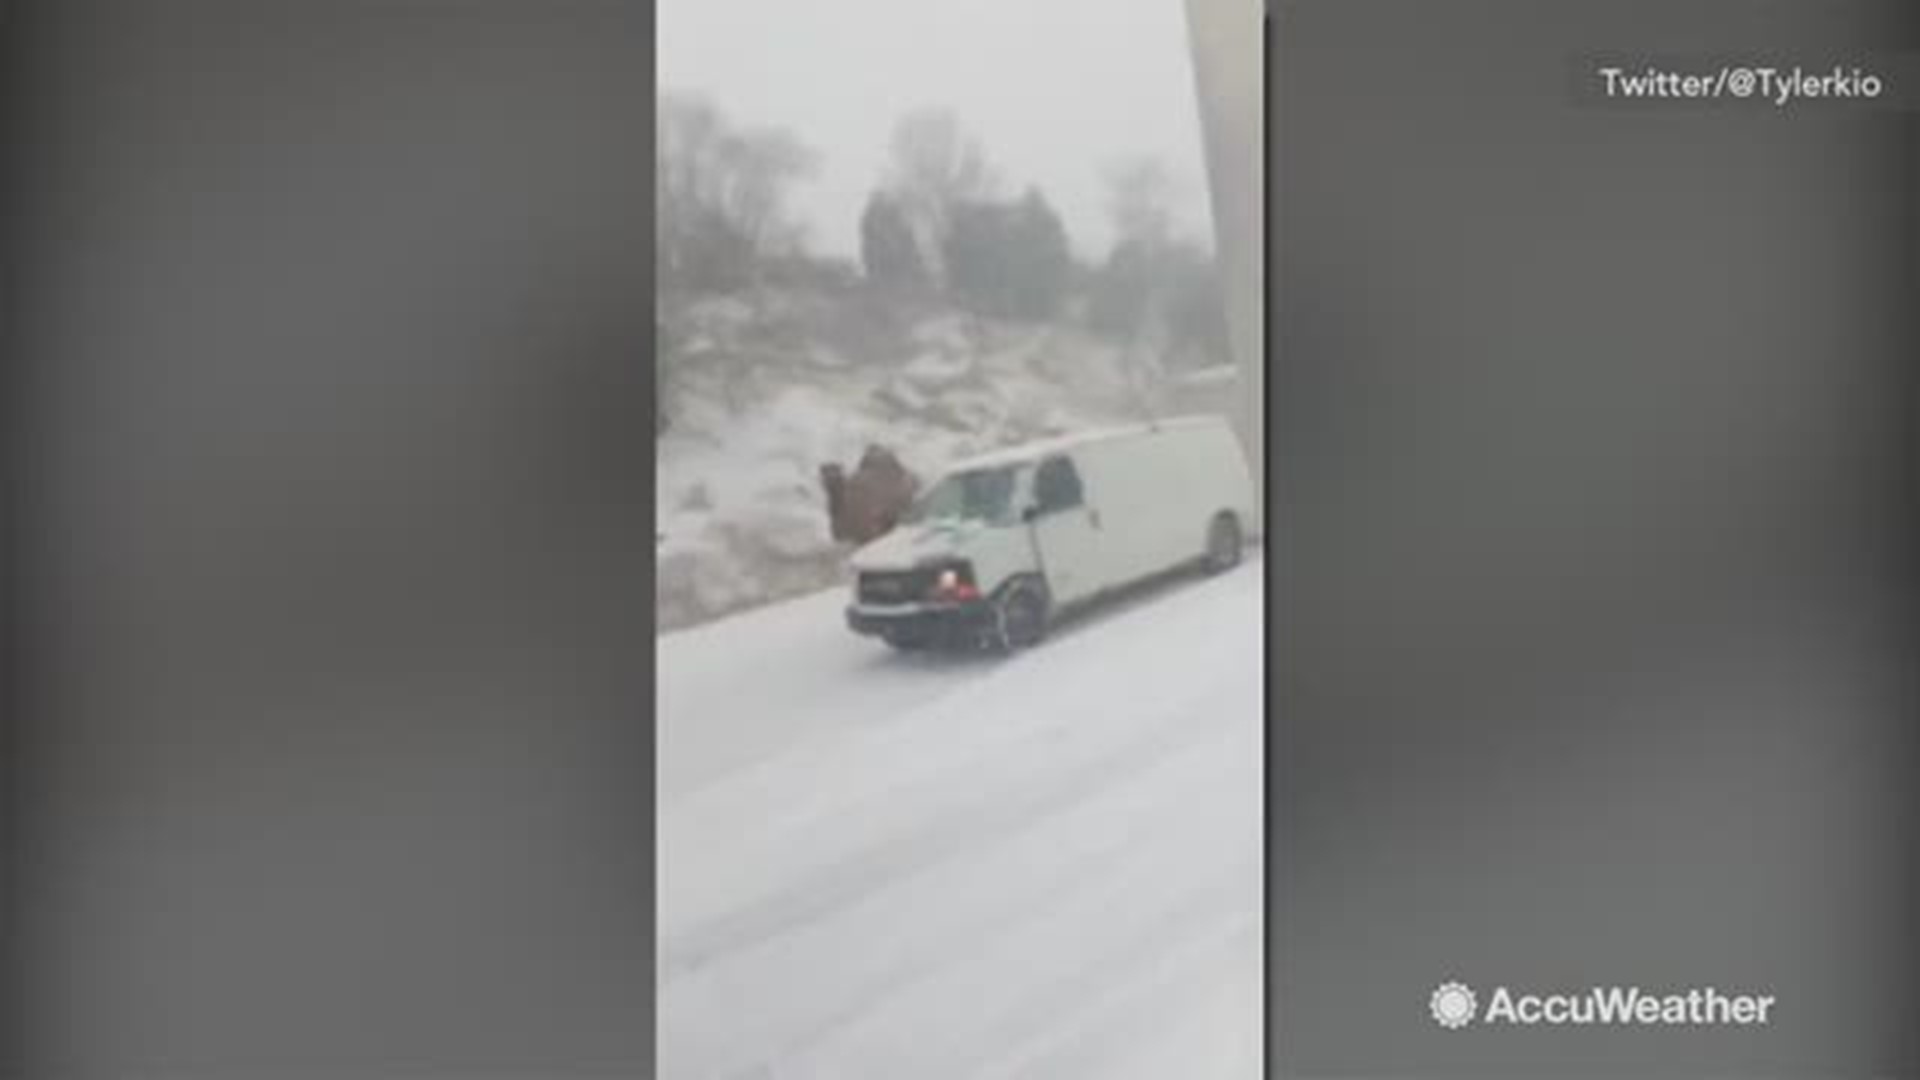 What are the odds of seeing a camel in a snowy highway of all places? That's what happened here in Philadelphia, Pennsylvania on Nov. 15.